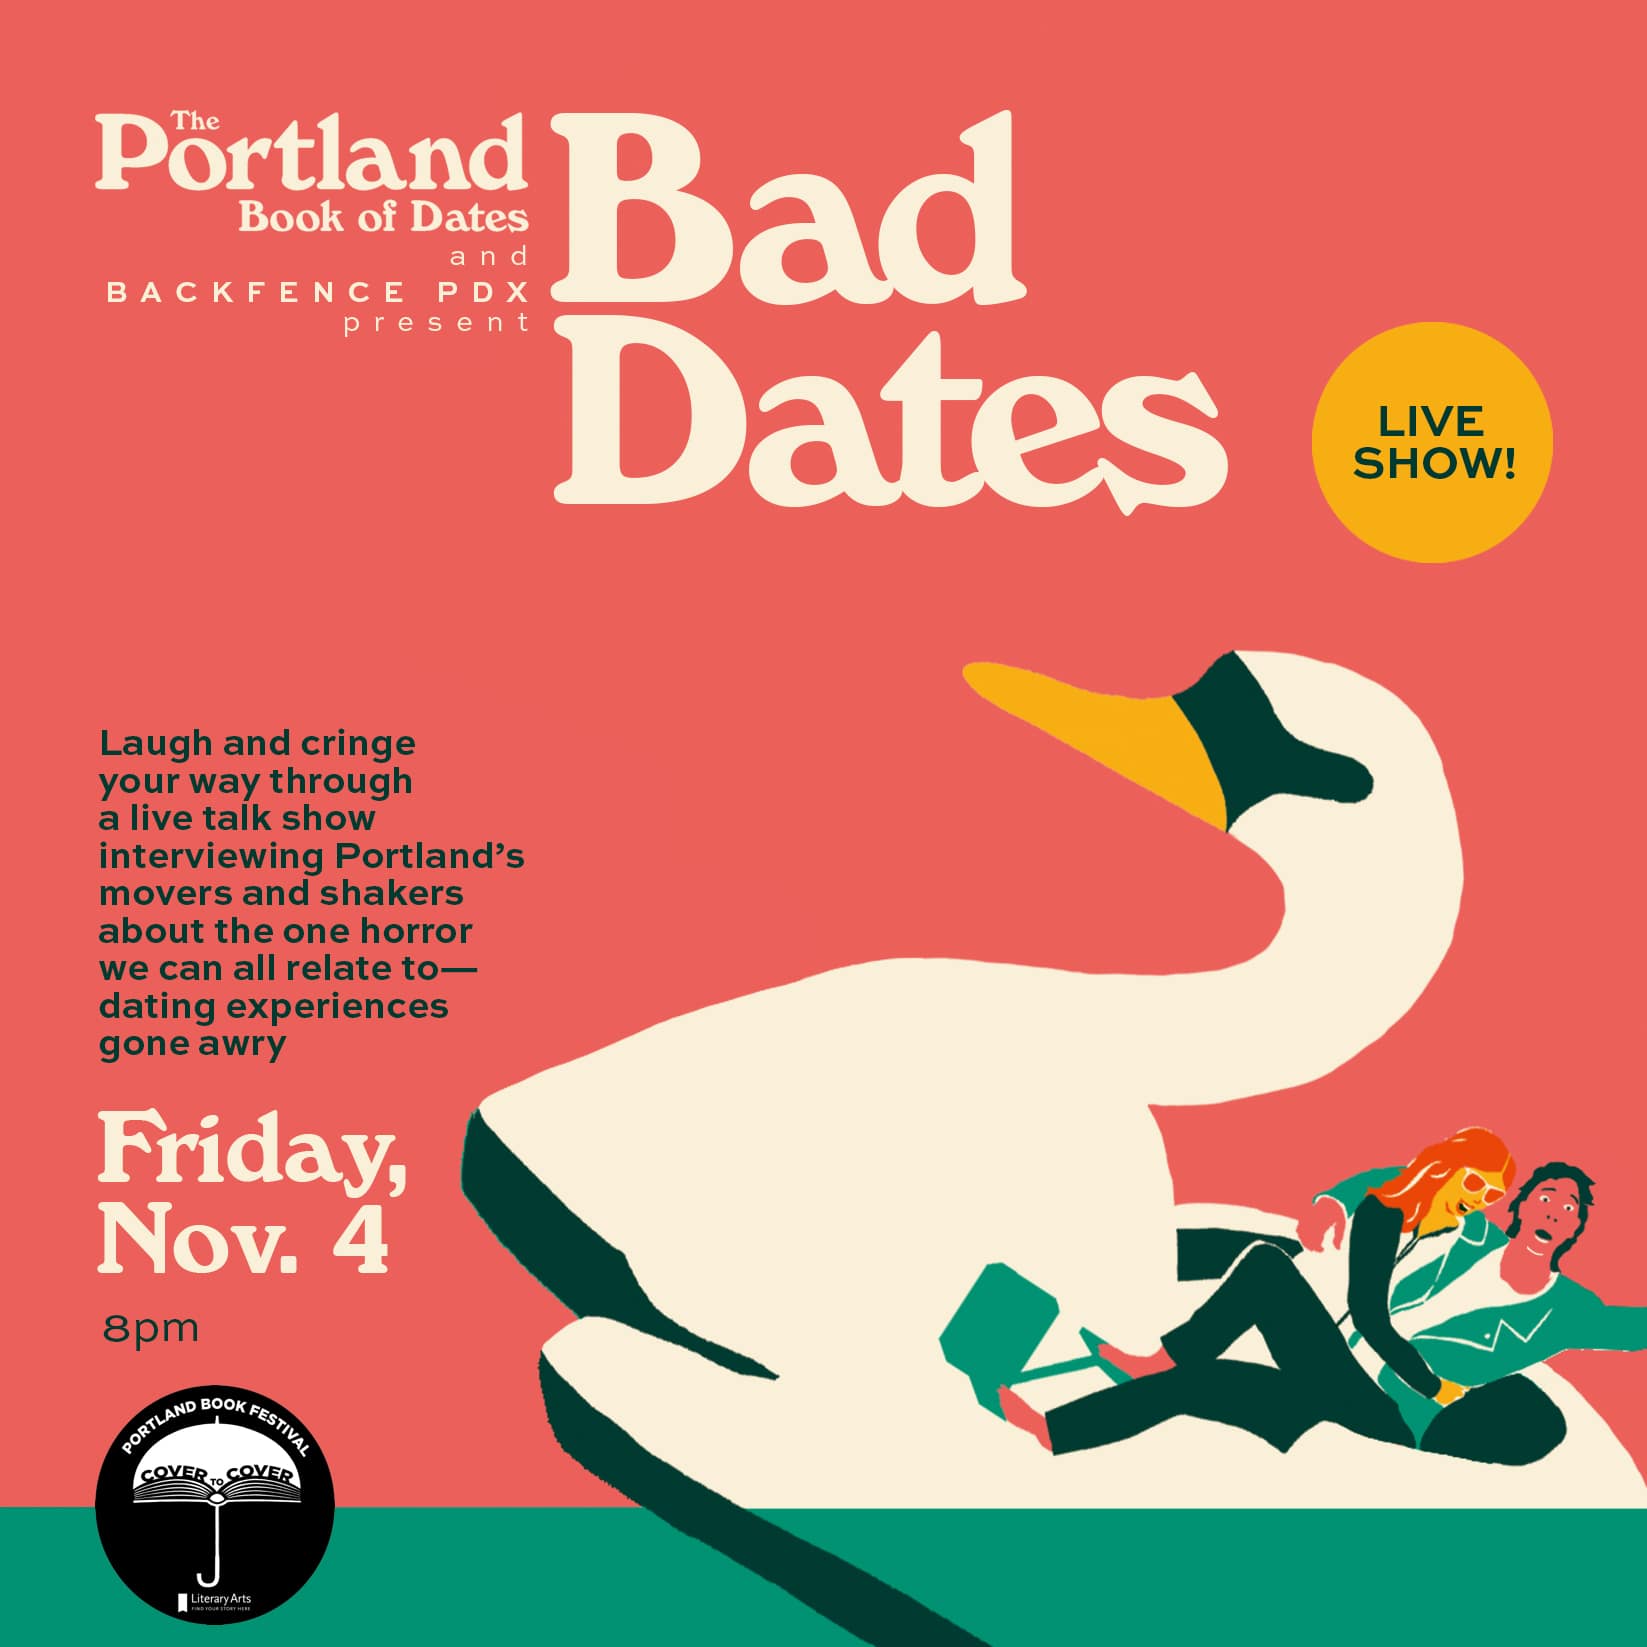 A promotional image for the event, Bad Dates at the Portland Book Festival Cover to Cover program.